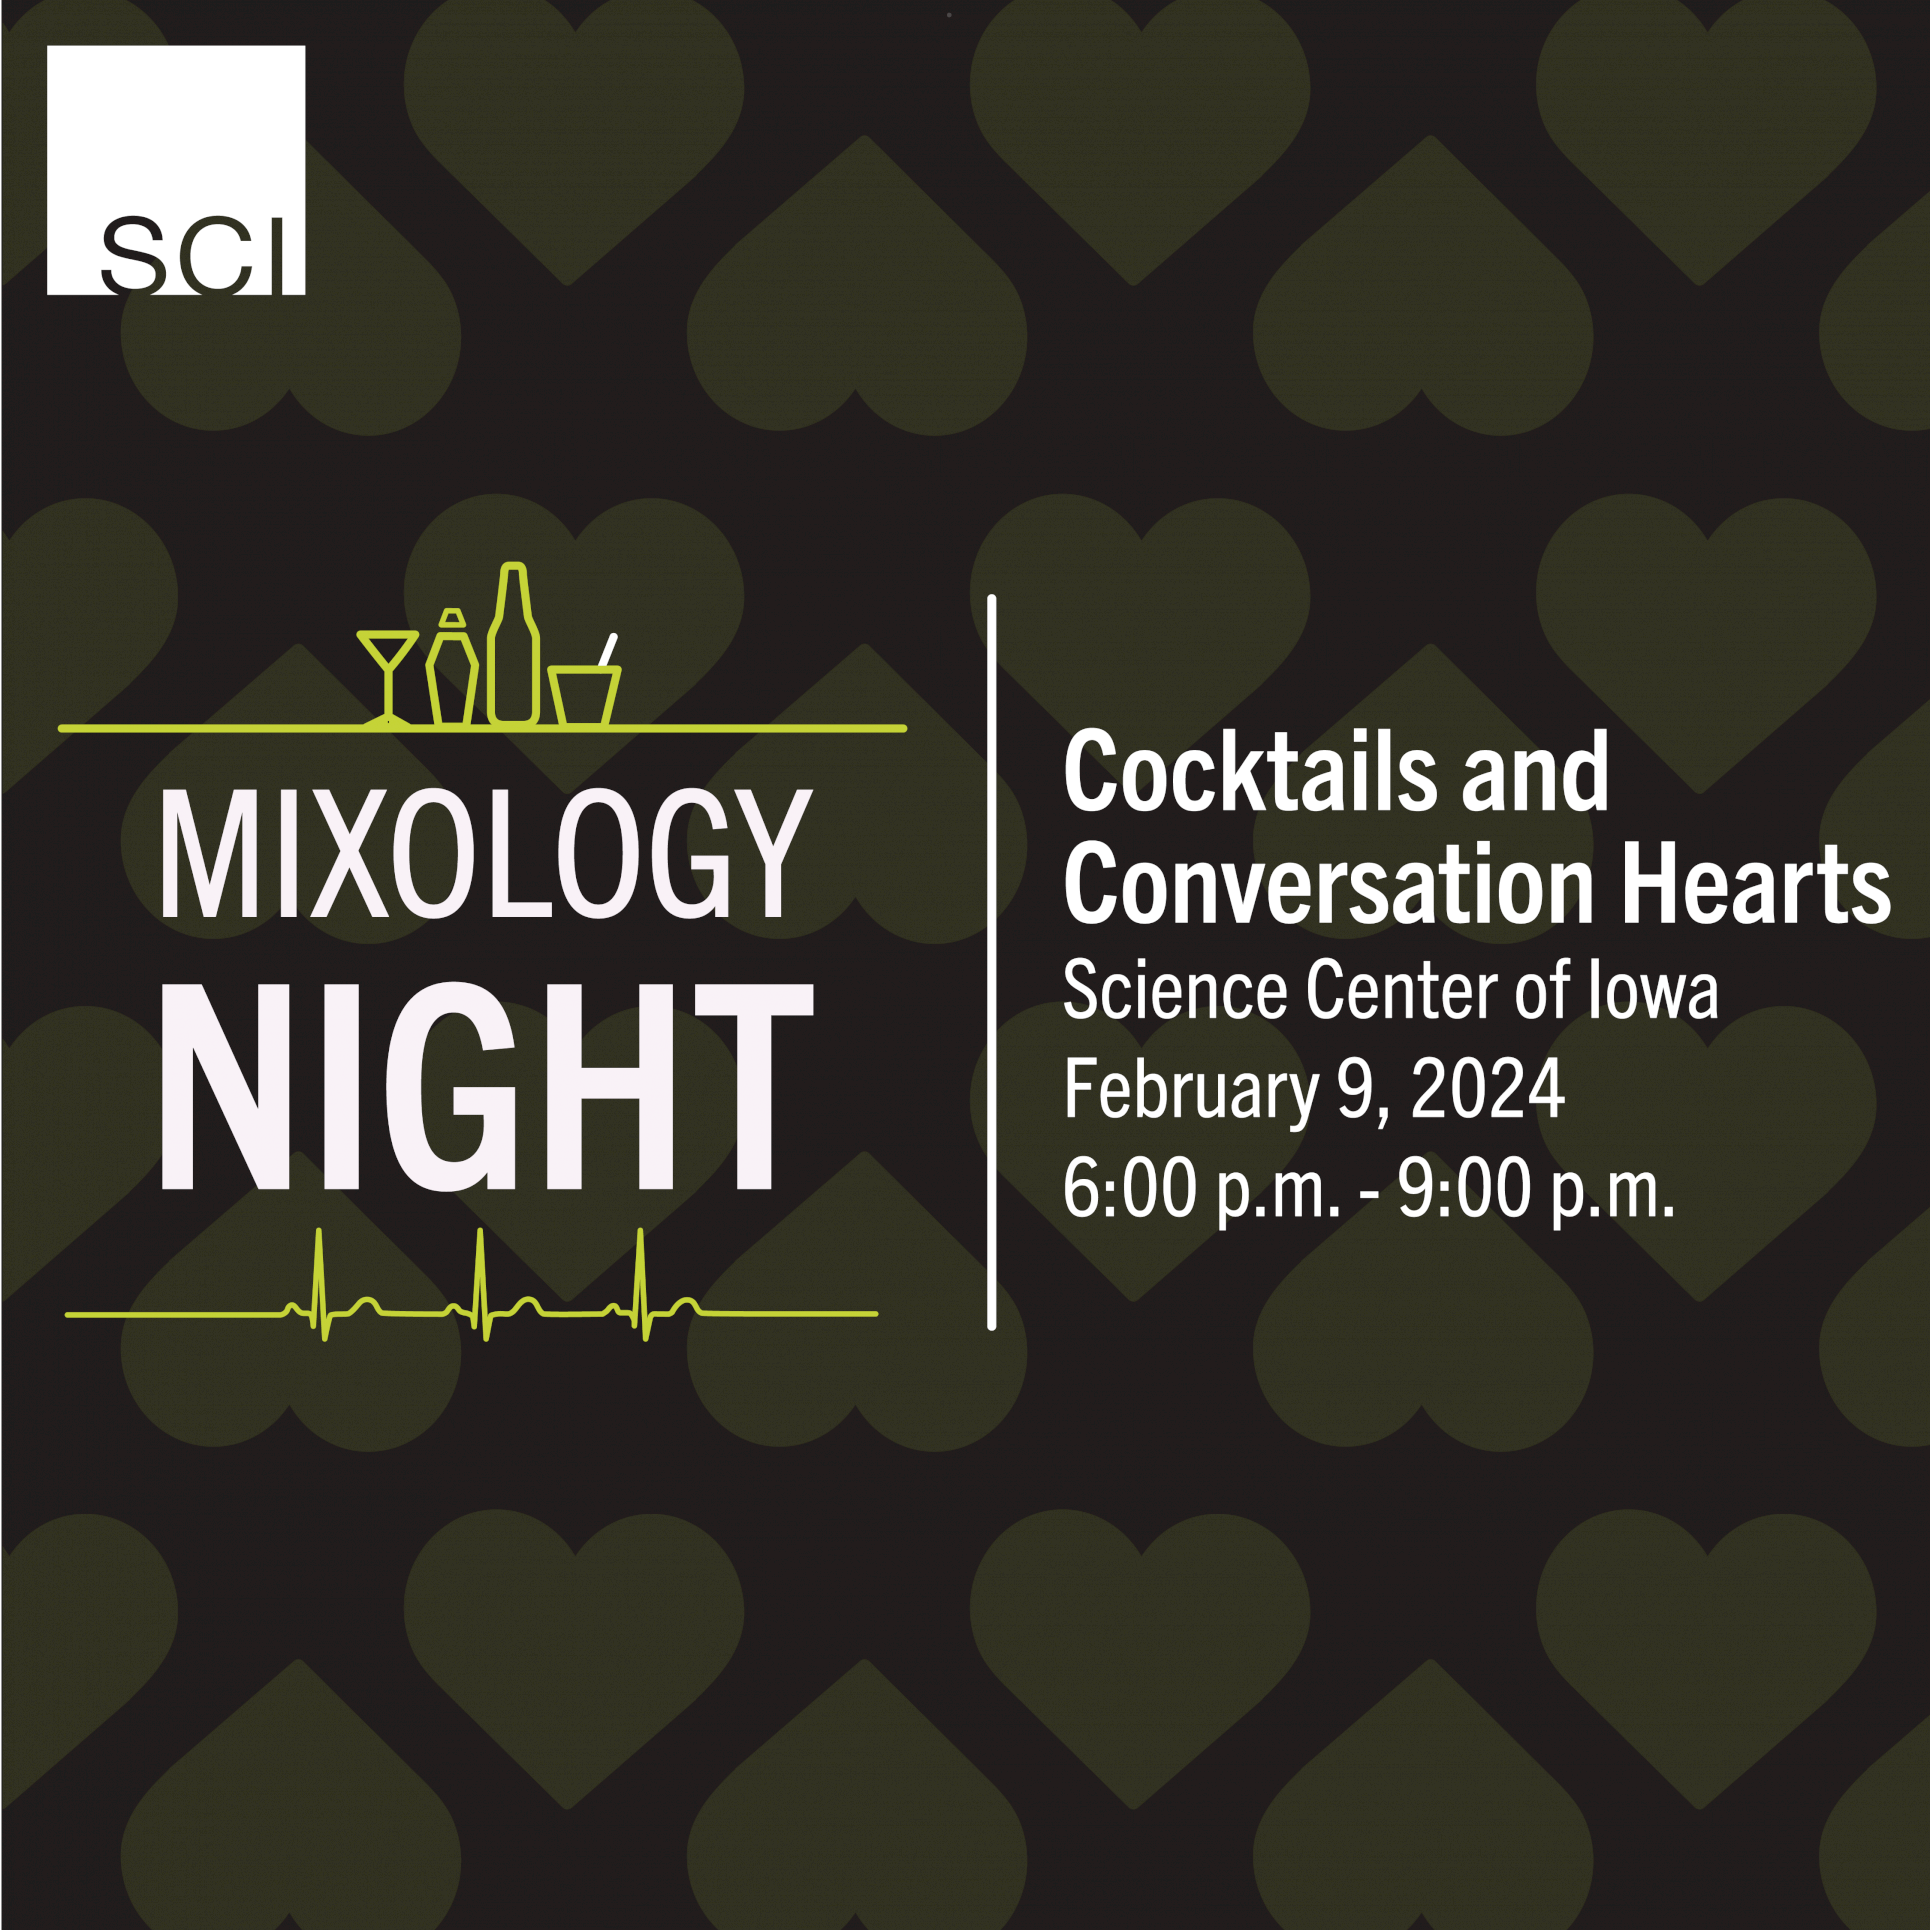 MIXOLOGY: COCKTAILS AND CONVERSATION HEARTS